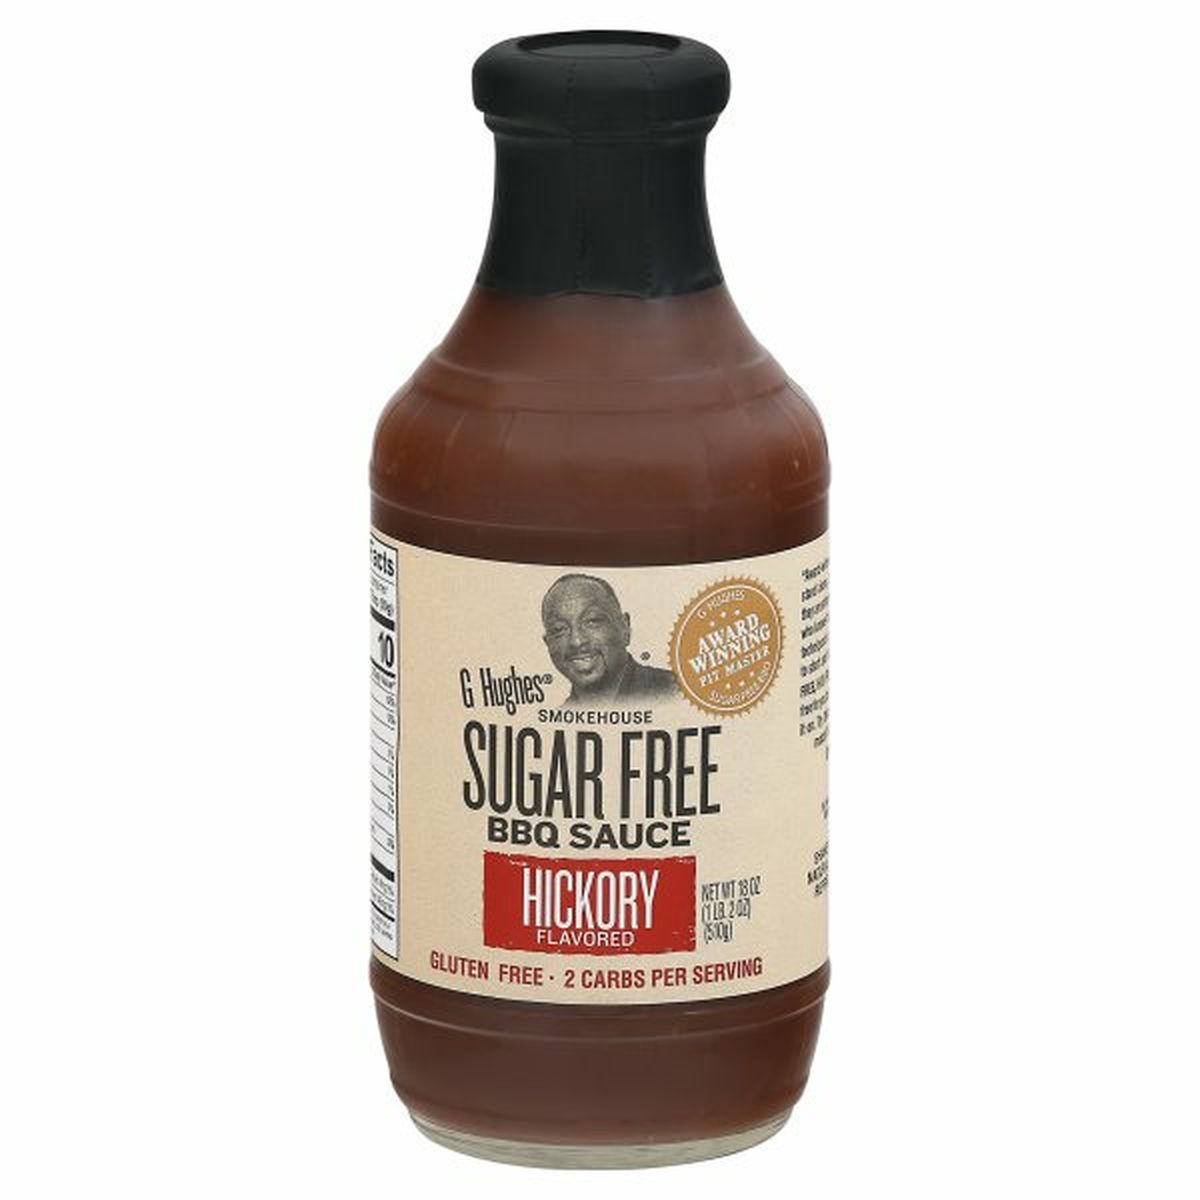 Calories in G Hughes BBQ Sauce, Sugar Free, Hickory Flavored, Smokehouse